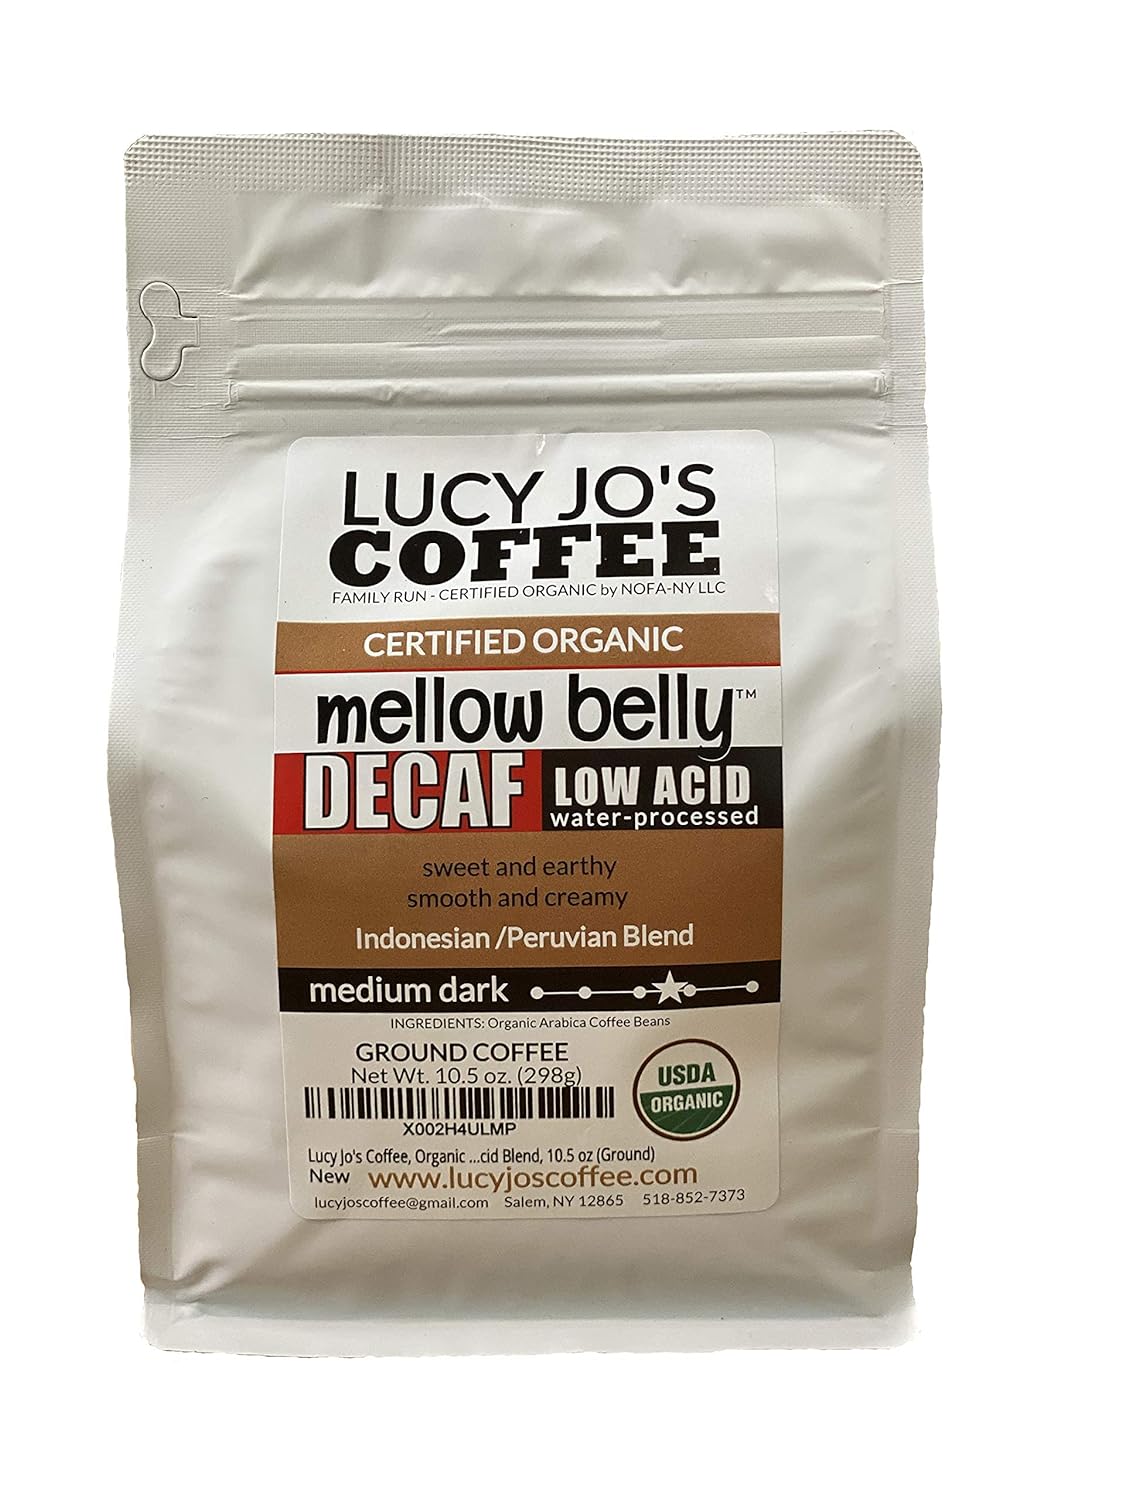 I got this for my dad for Christmas. He recently switched to decaf and I thought this brand sounded good. He loved it and will get more when he runs out. So if you're searching for a decaf that actually tastes good, try Lucy Jo' Coffee, Organic Decaf Mellow Belly Low Acid Blend, Medium Dark, 10.5 oz (Ground)